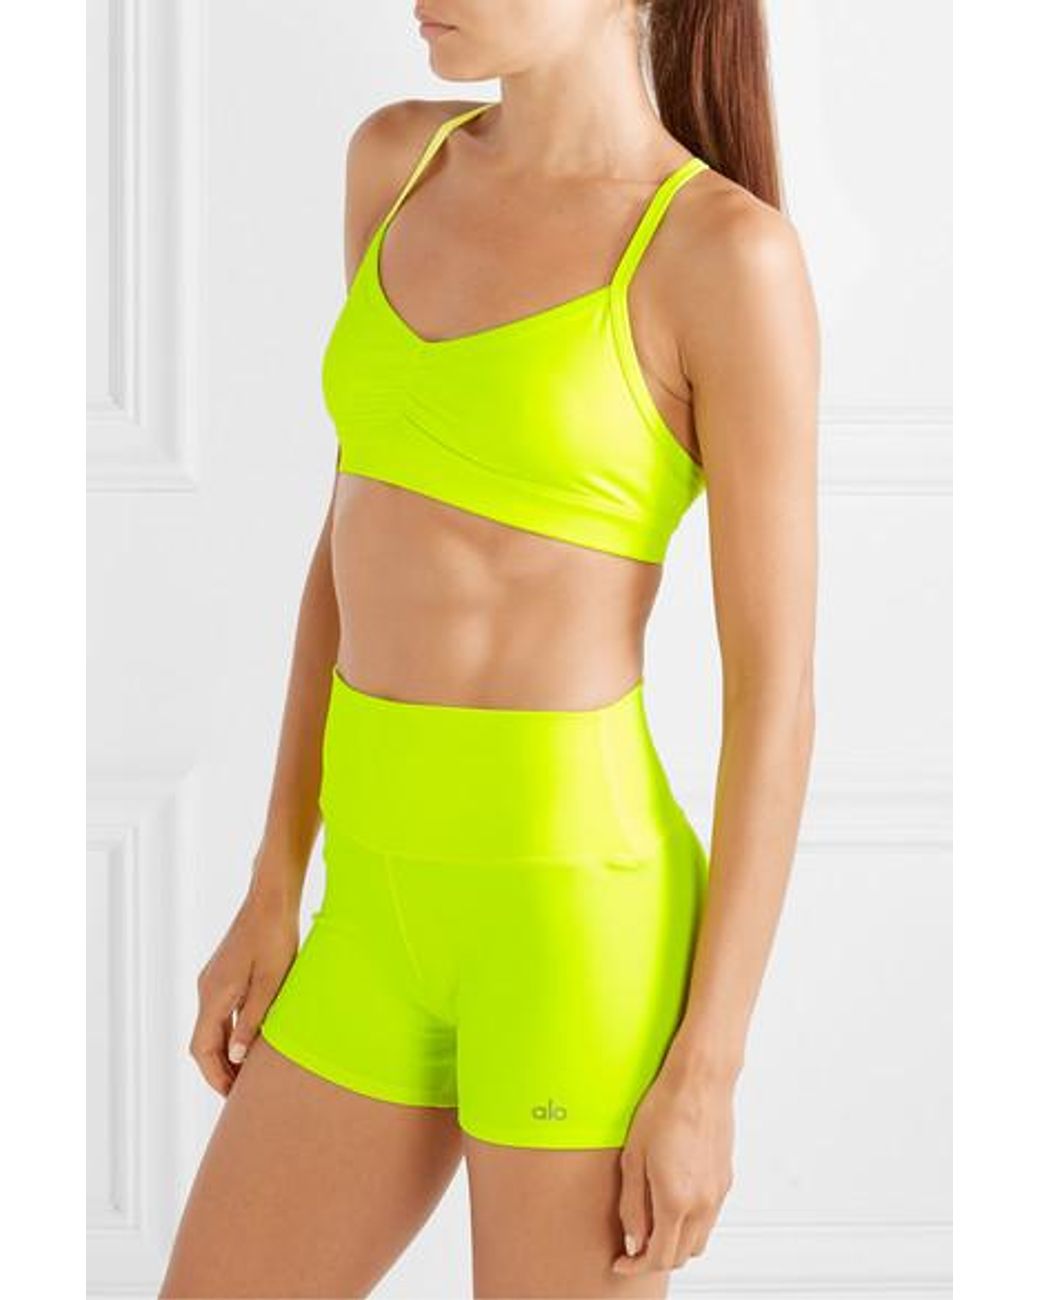 Alo Yoga Sunny Neon Ruched Stretch Sports Bra in Yellow